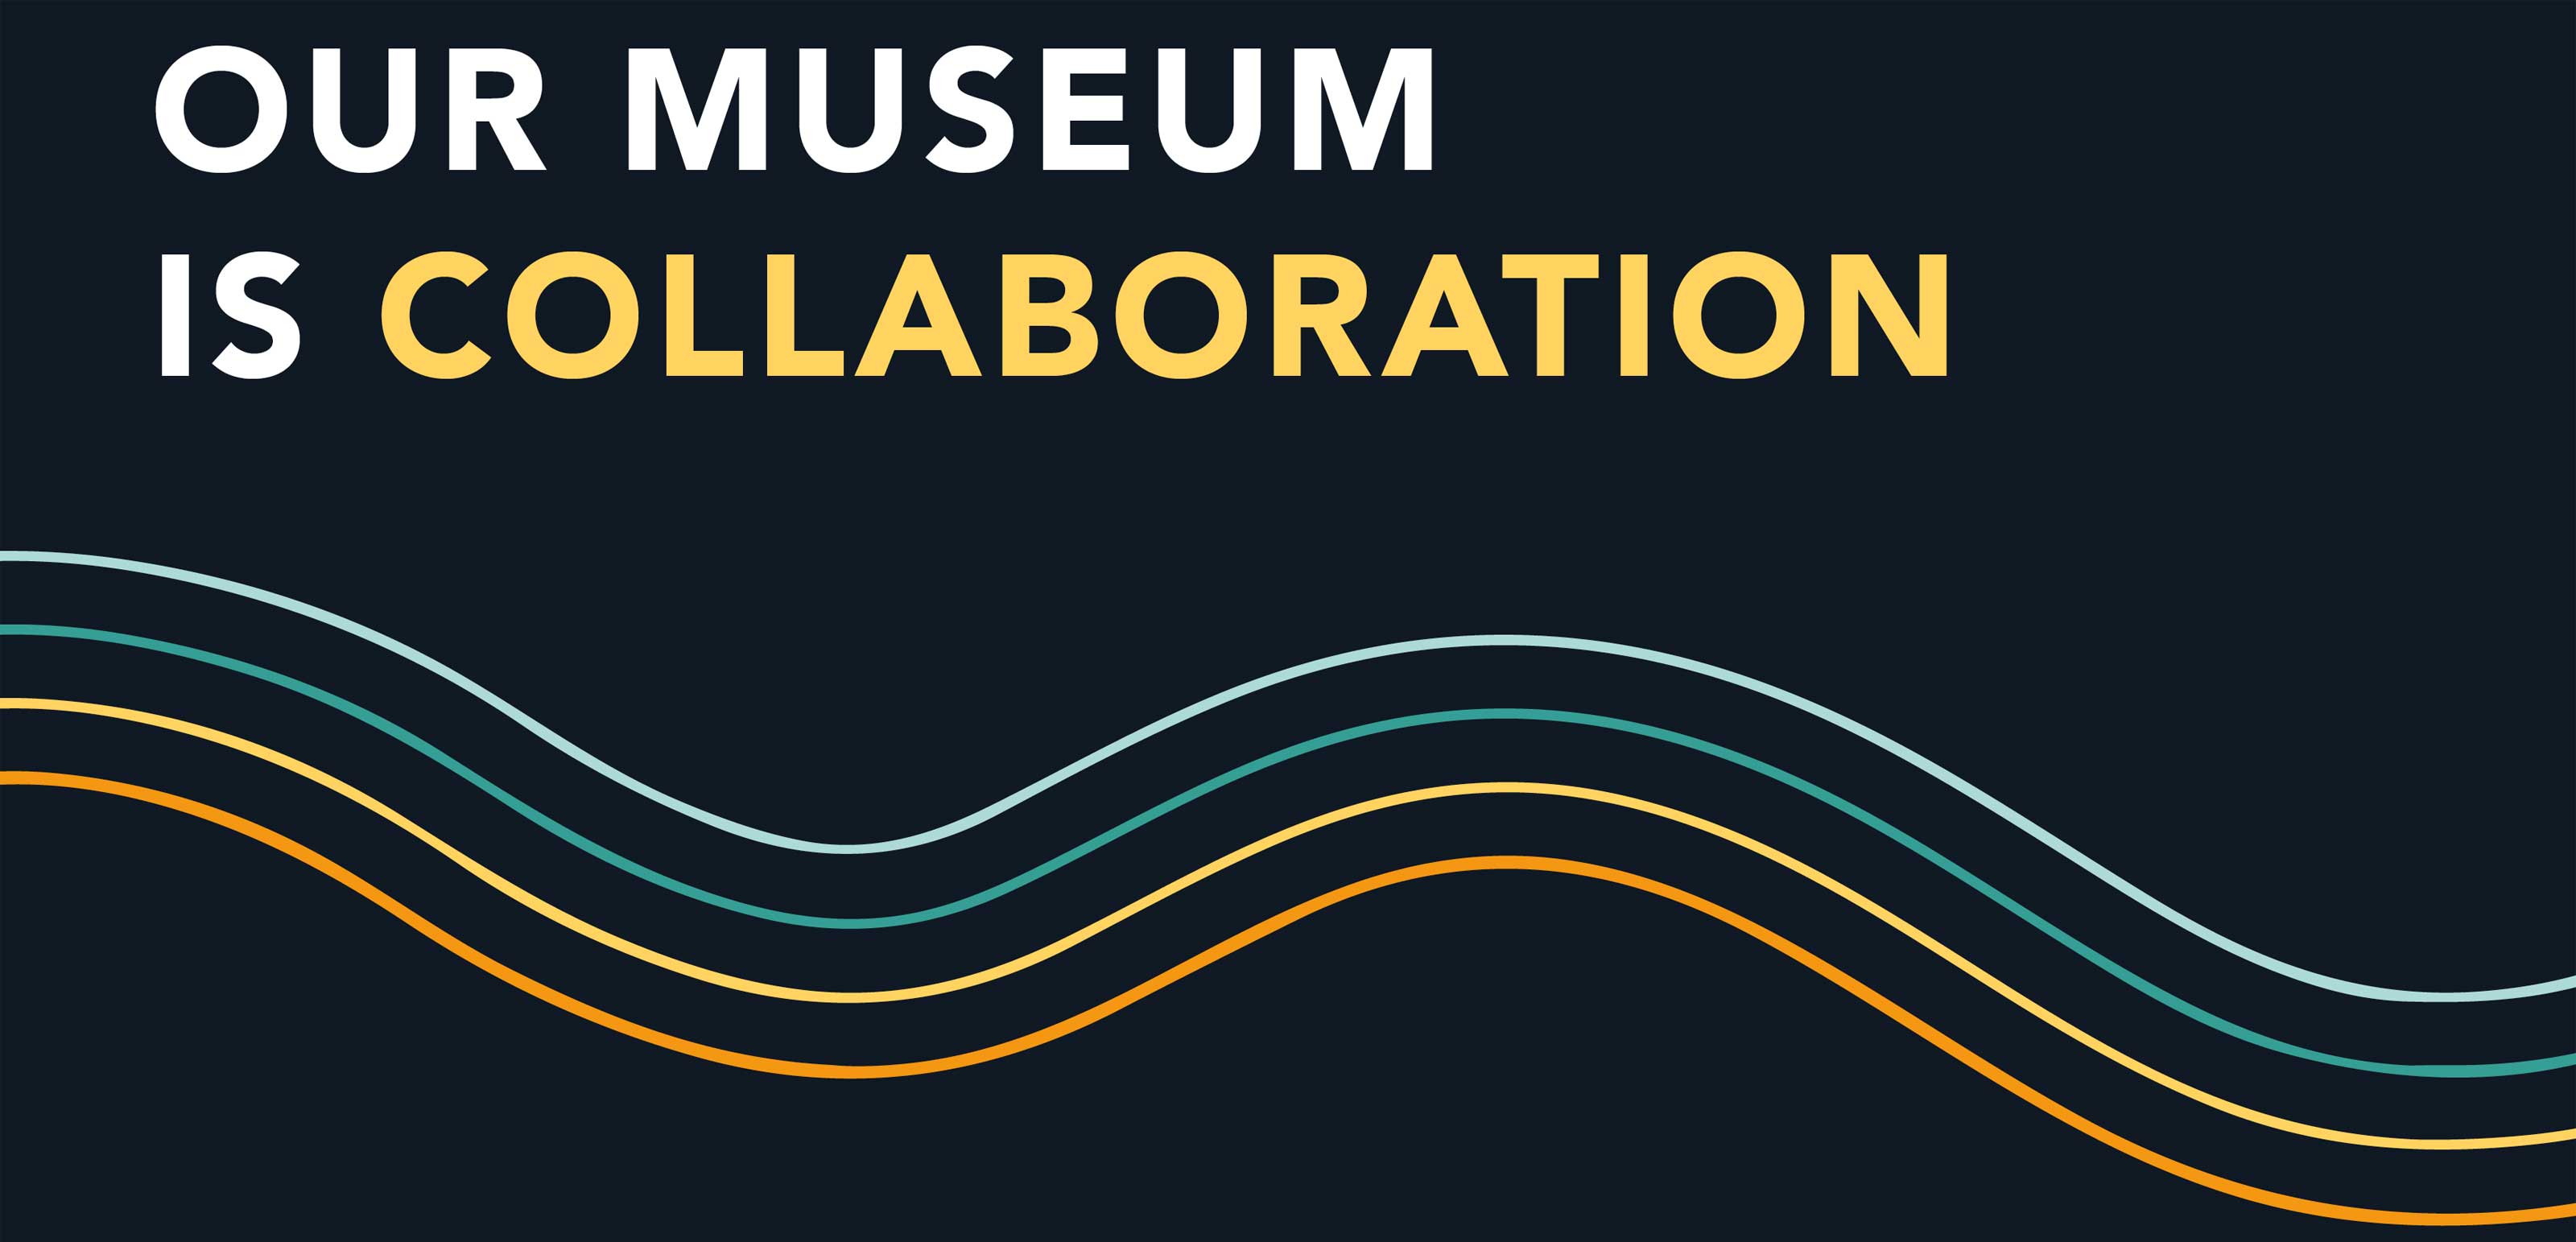 Our Museum is Collaboration